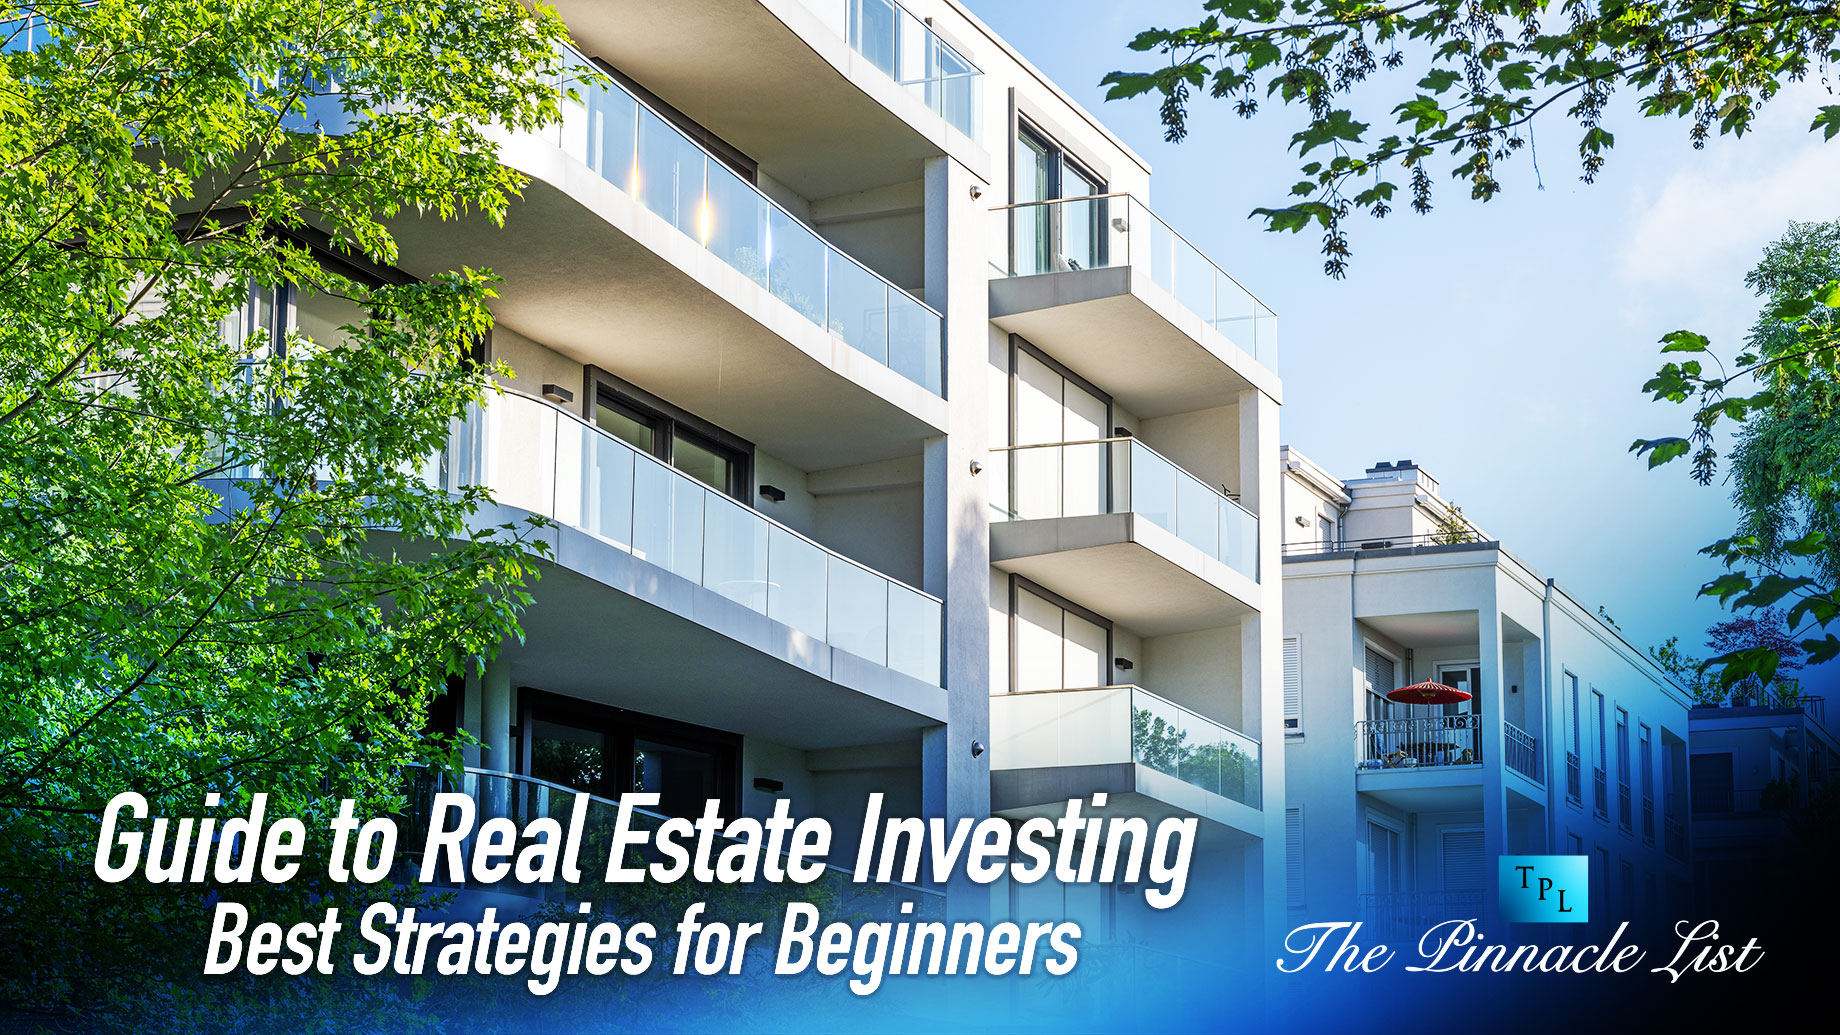 Guide to Real Estate Investing: Best Strategies for Beginners